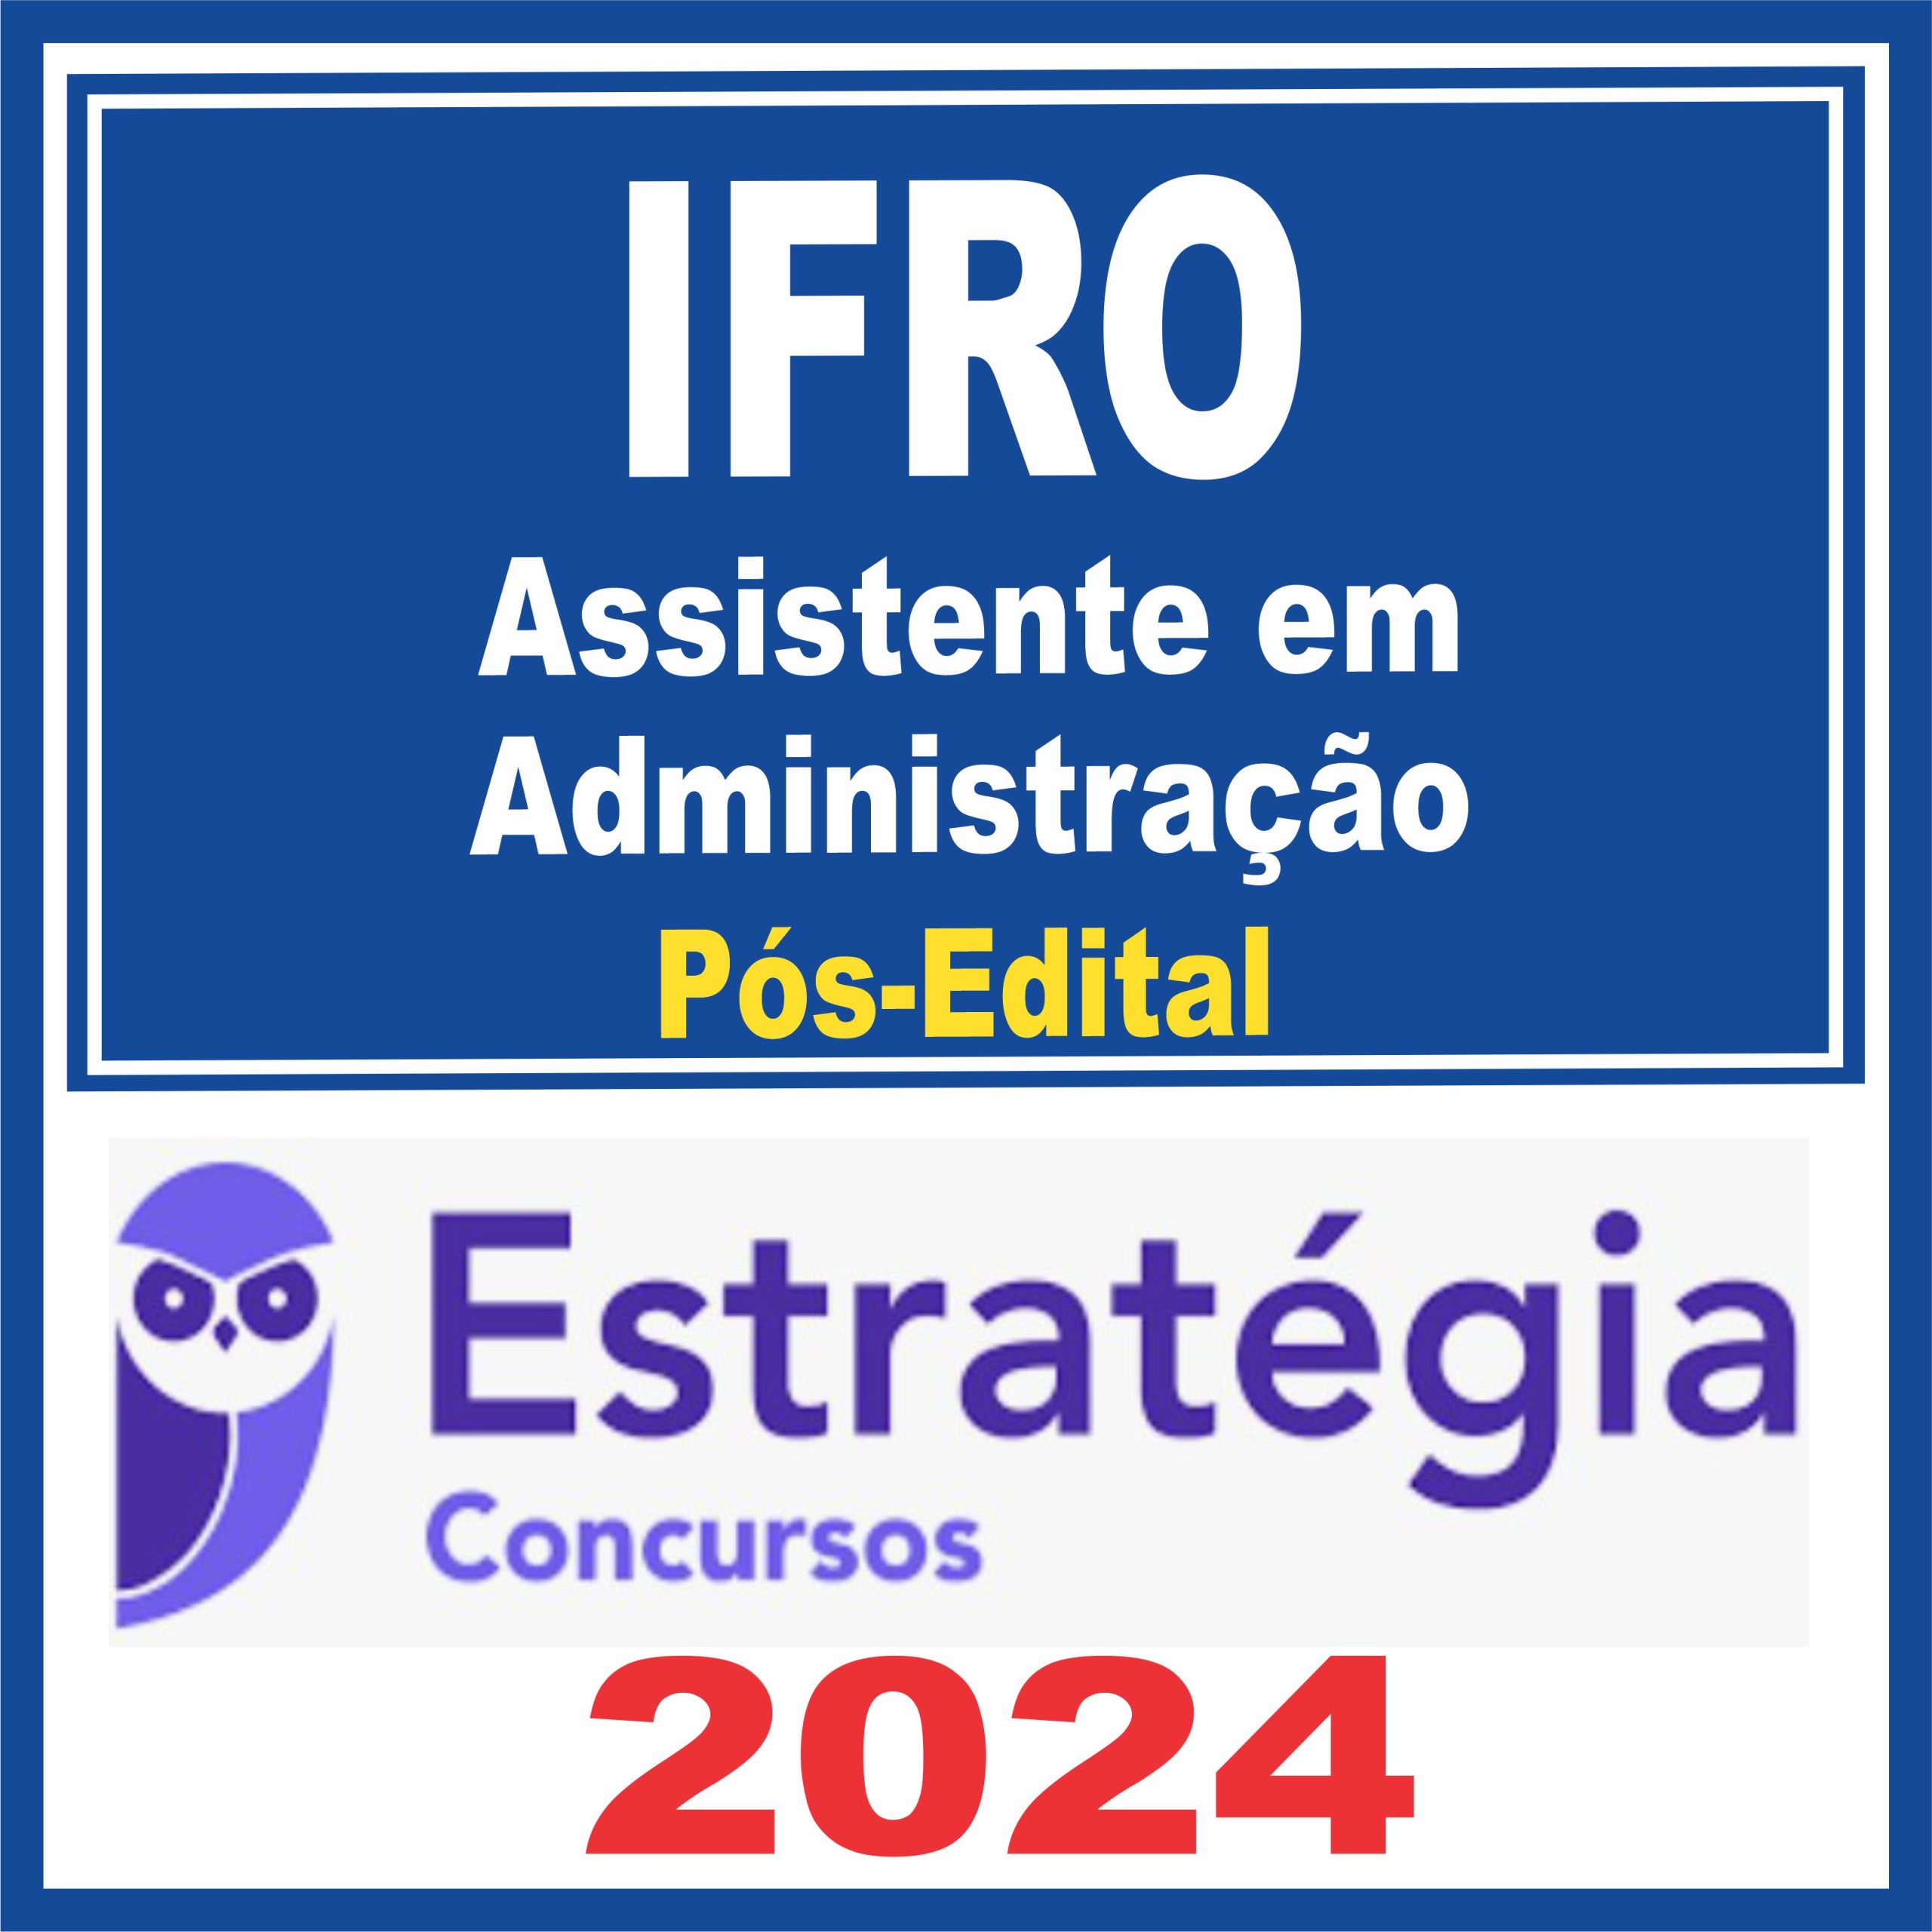 ifro-assist-adm